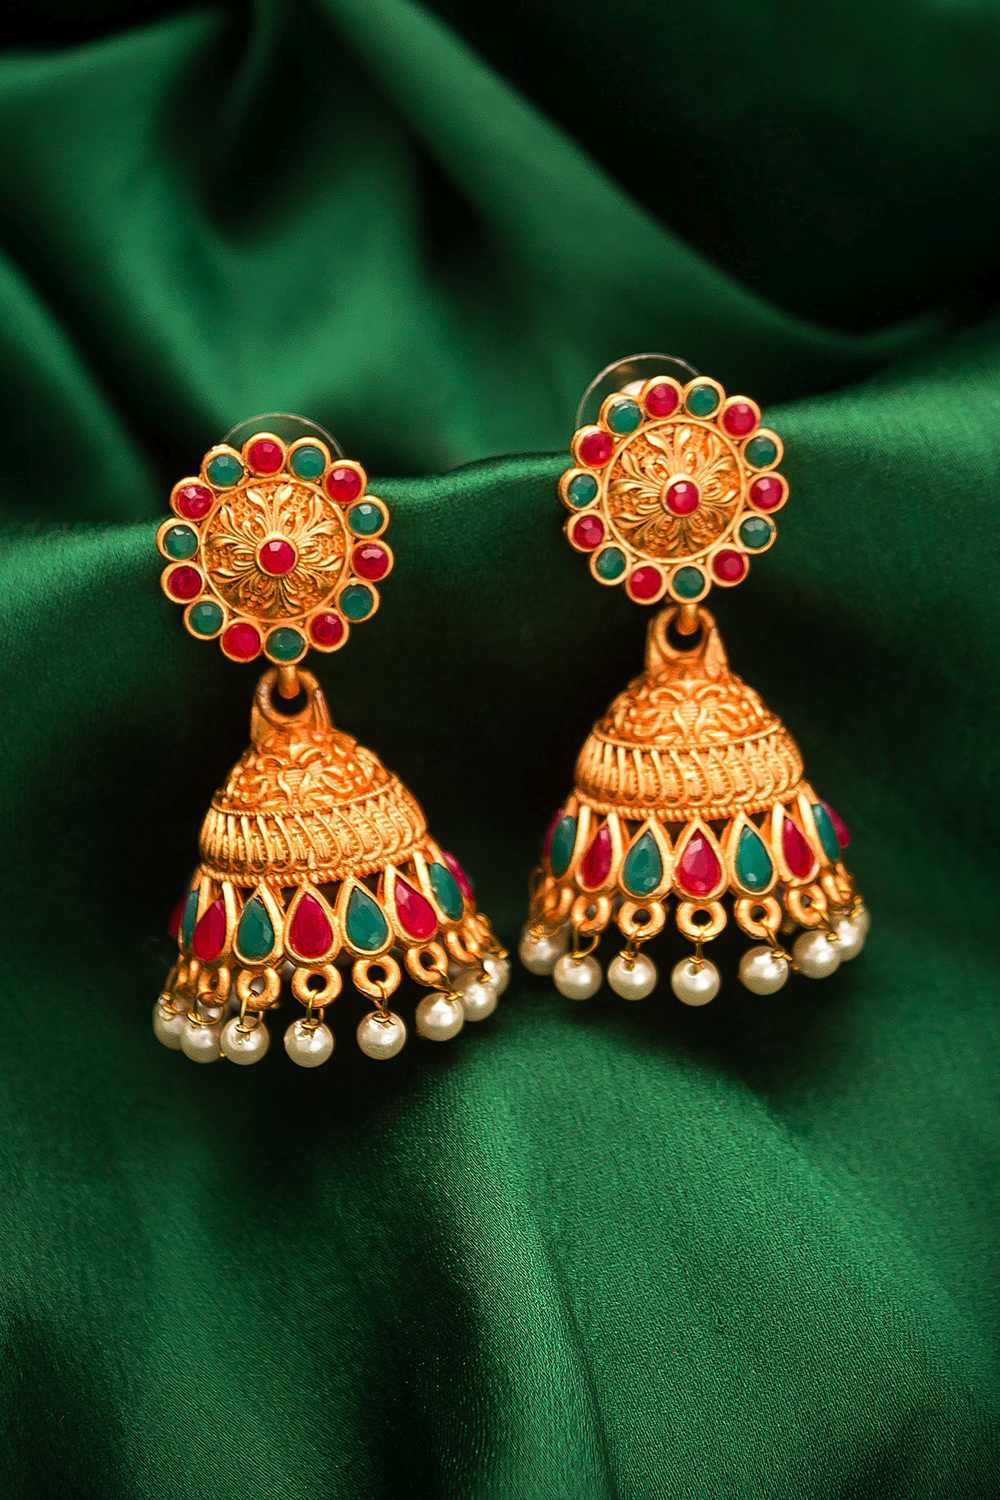 Buy Women's Alloy Jhumka Earrings in Red and Green